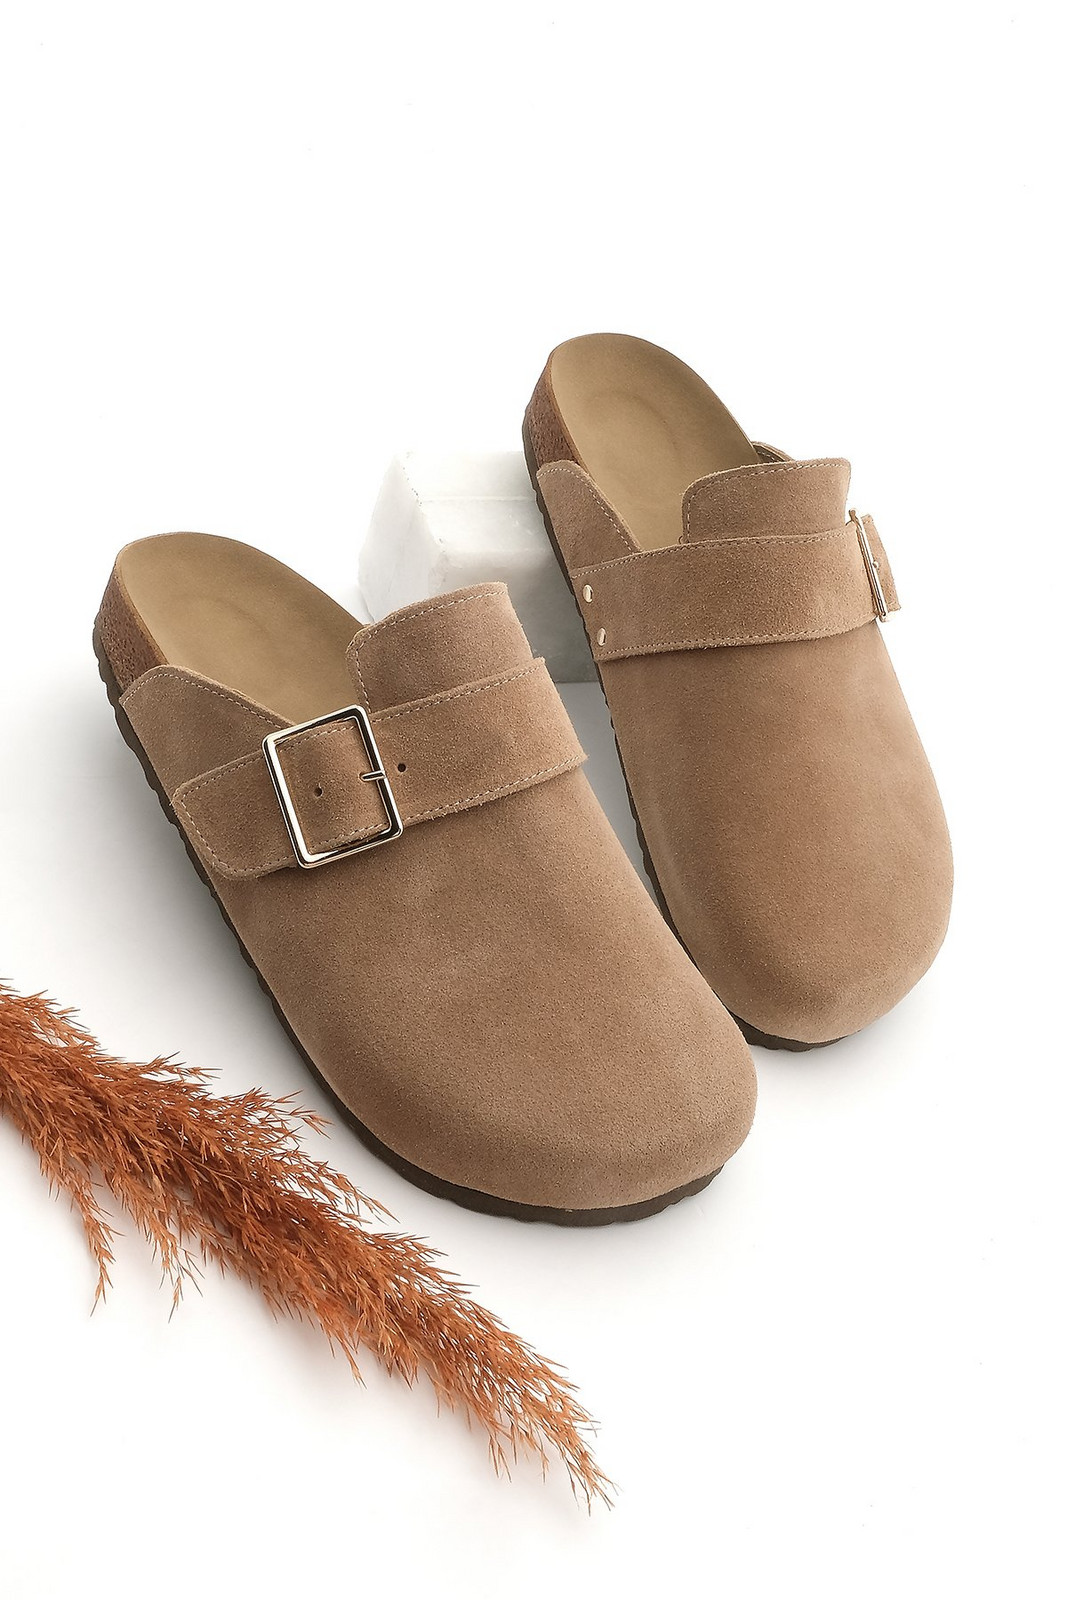 Marjin Women's Genuine Leather Eva Sole Closed Front Buckle Daily Slippers Sumpa Camel Suede